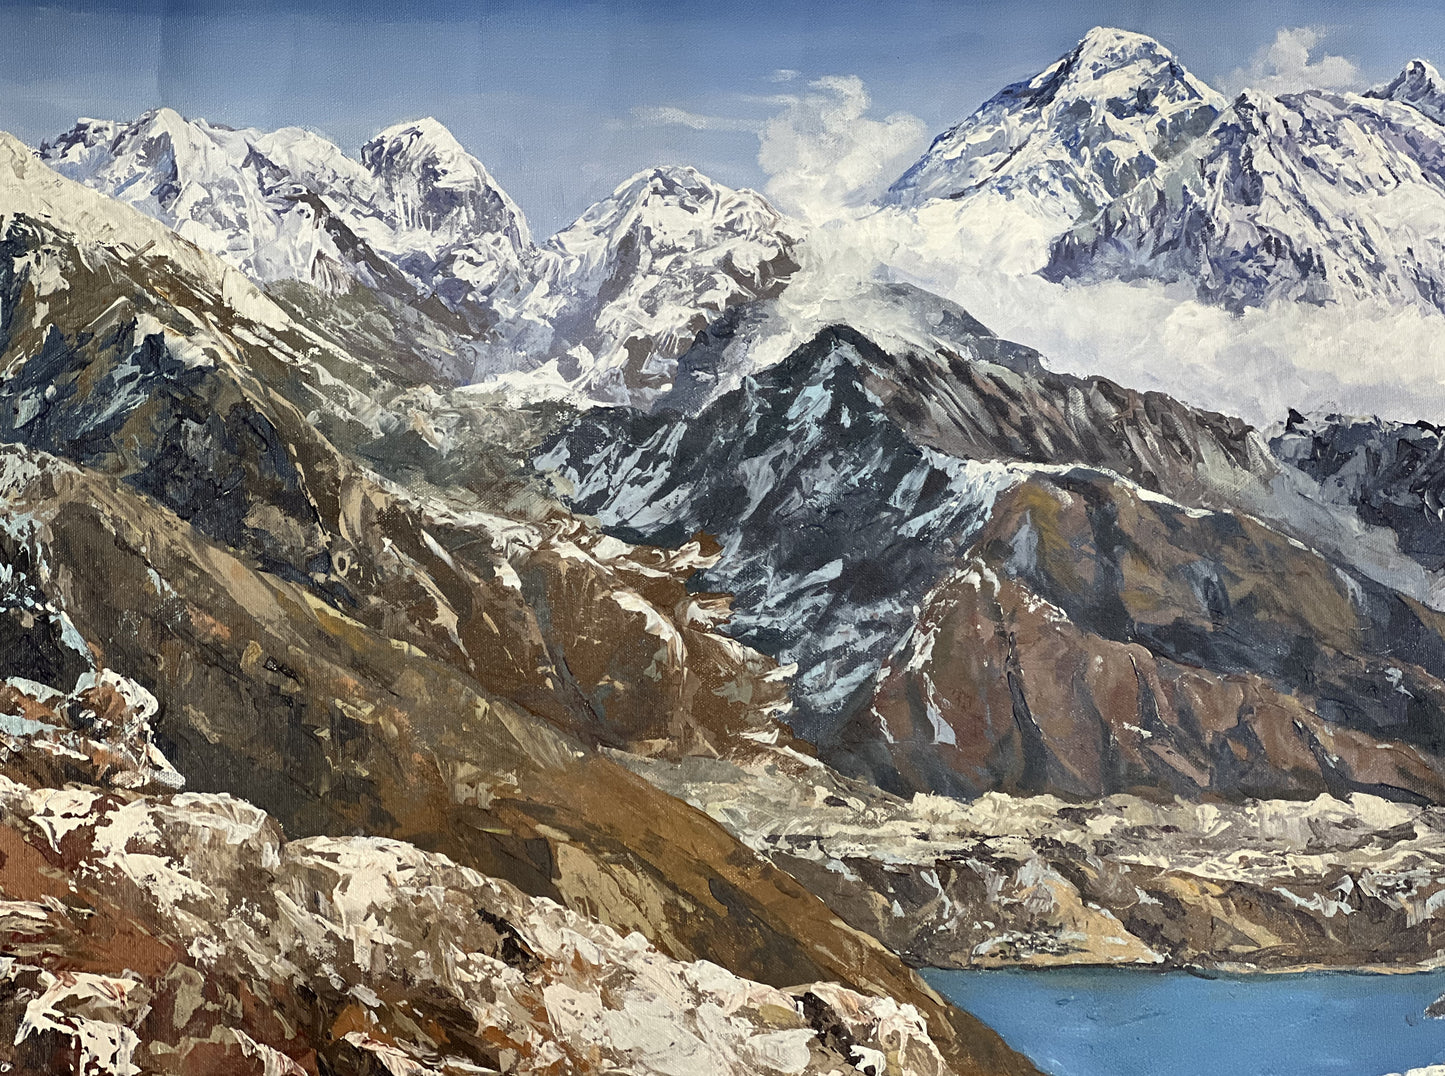 Majestic Mount Everest/ Highest Peak in the World/ Acrylic Landscape Painting On Canvas/ High Quality Palette Knife Painting